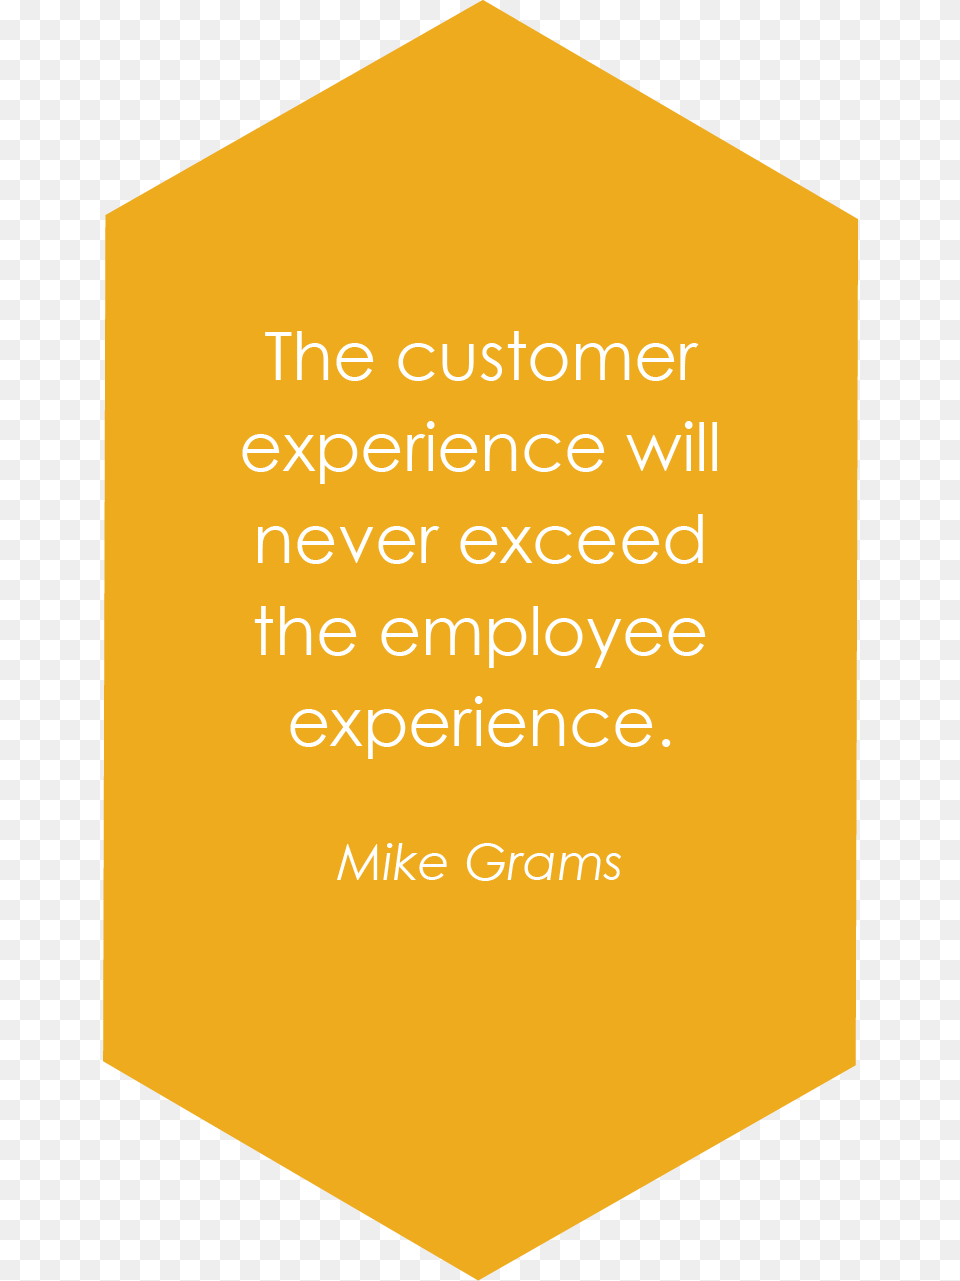 Mike Grams Quote Employee Experience Orange Free Transparent Png